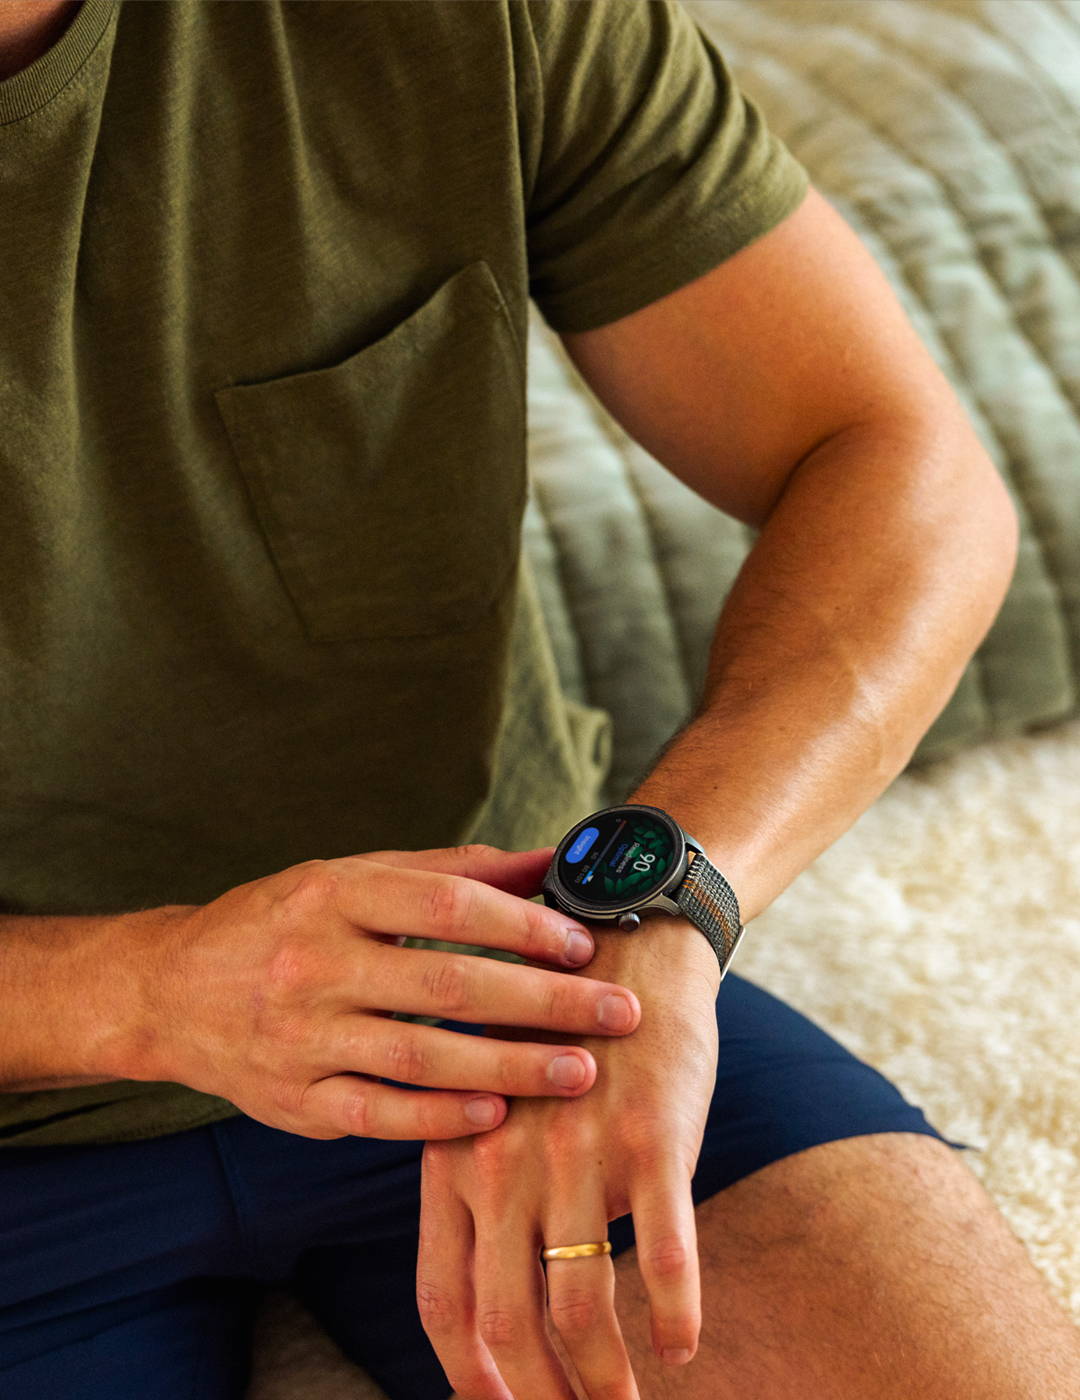 The Amazfit Balance Smart Watch — A Comprehensive Review, by Nazimriaz